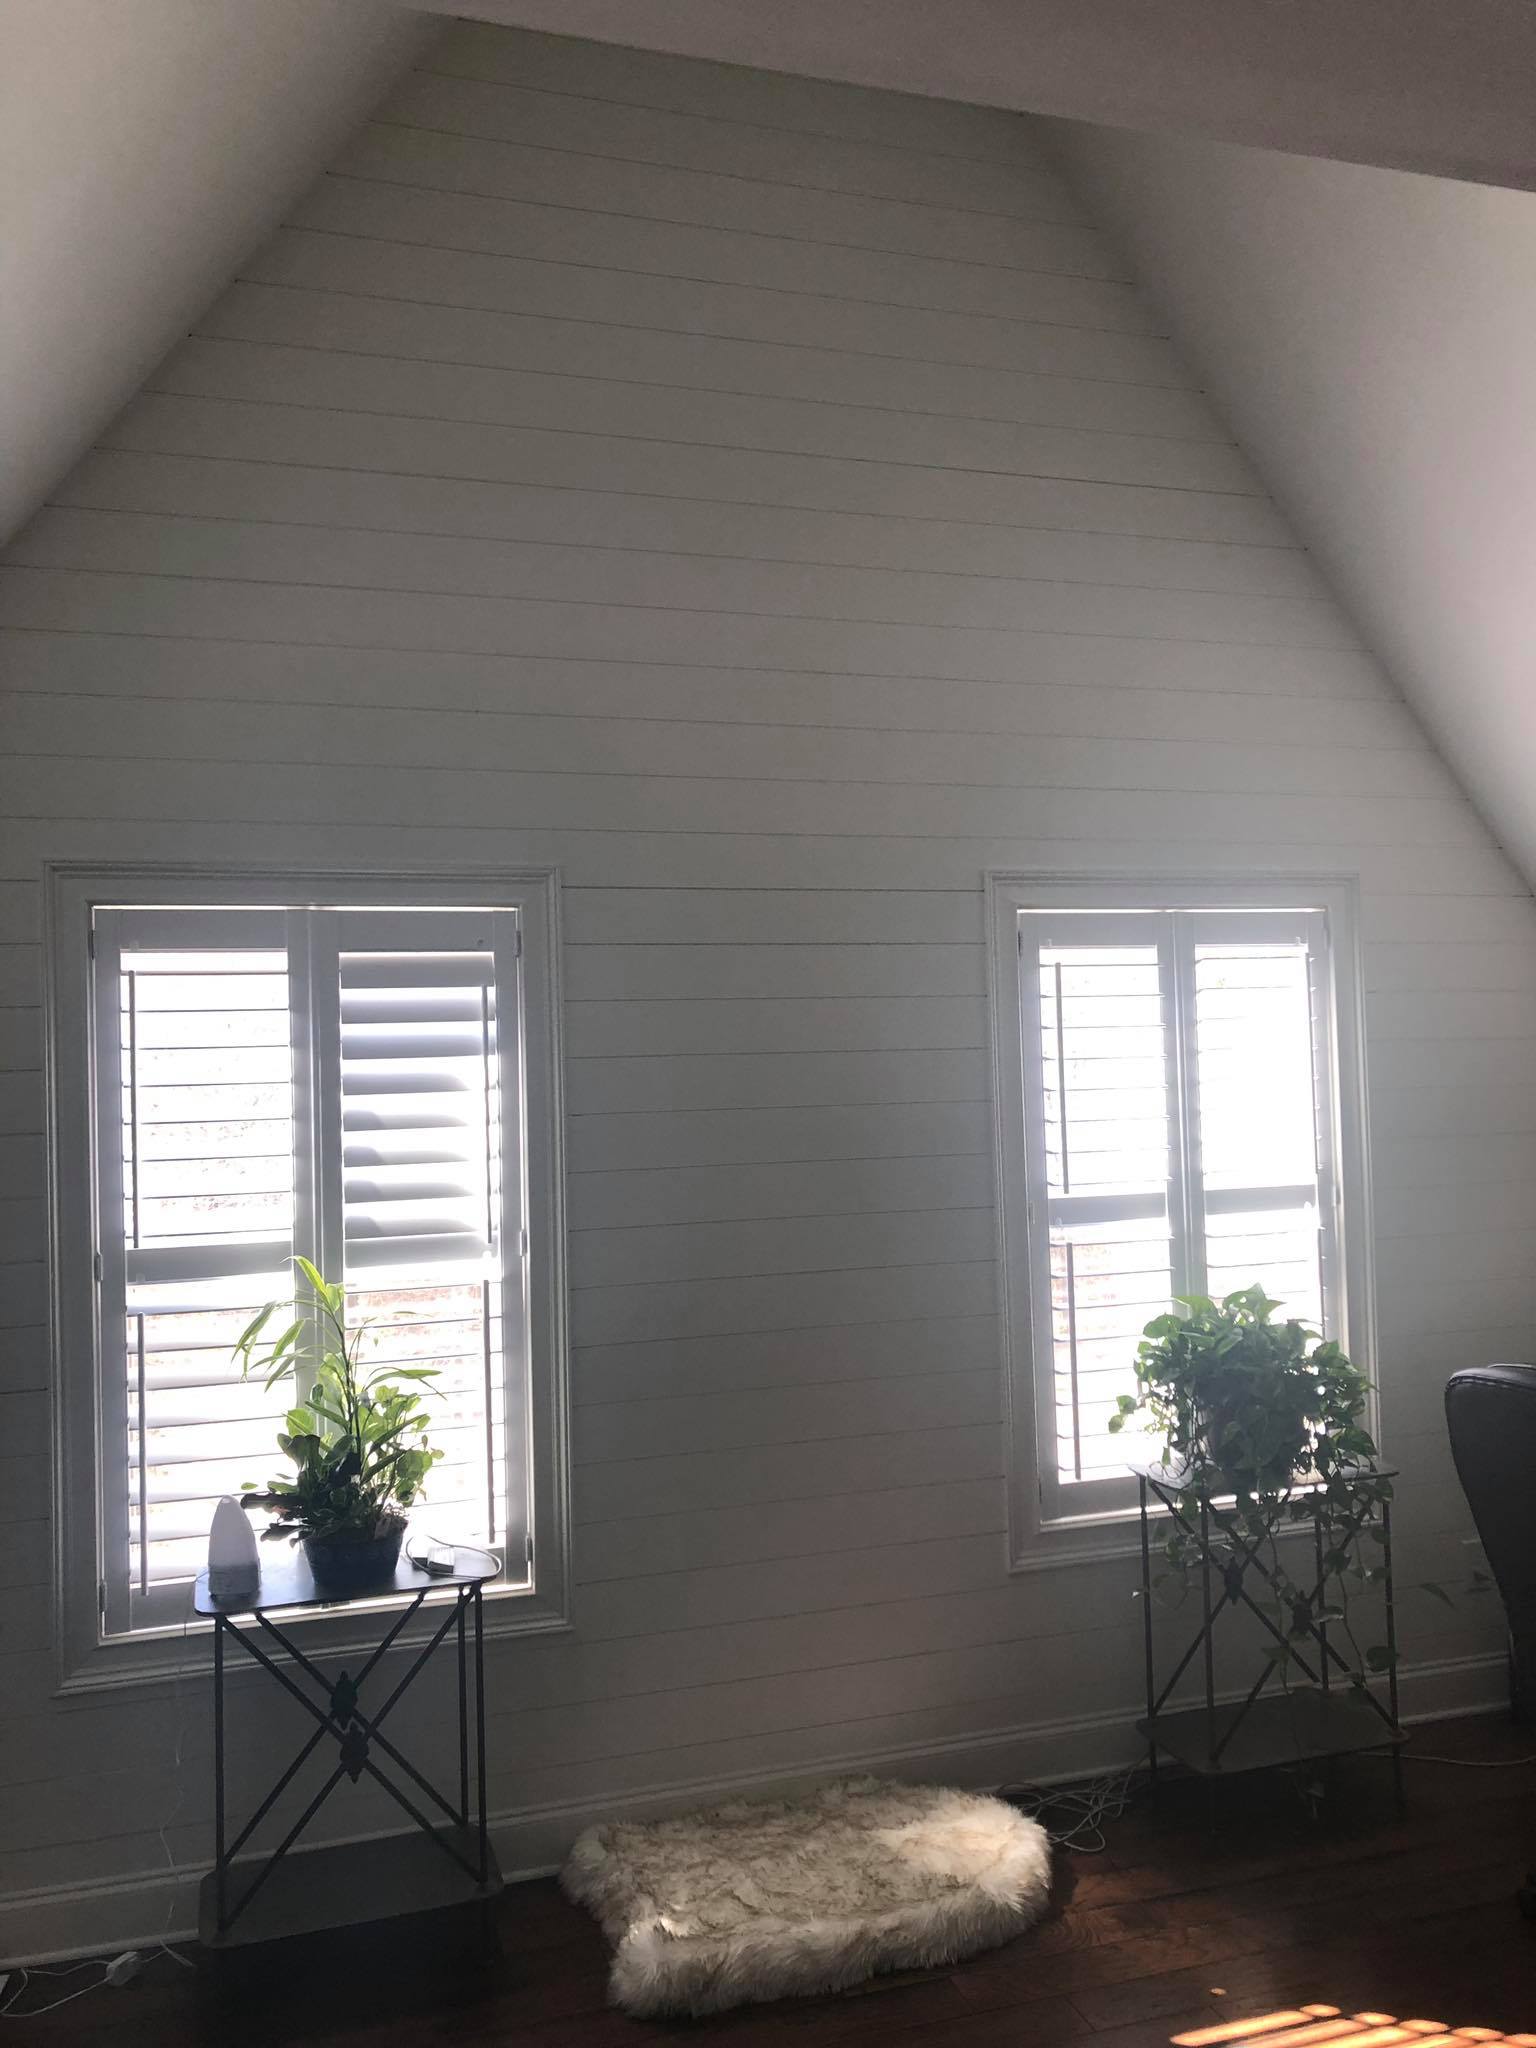 Shiplap On Walls Painted White with Hardwood Floor Installed